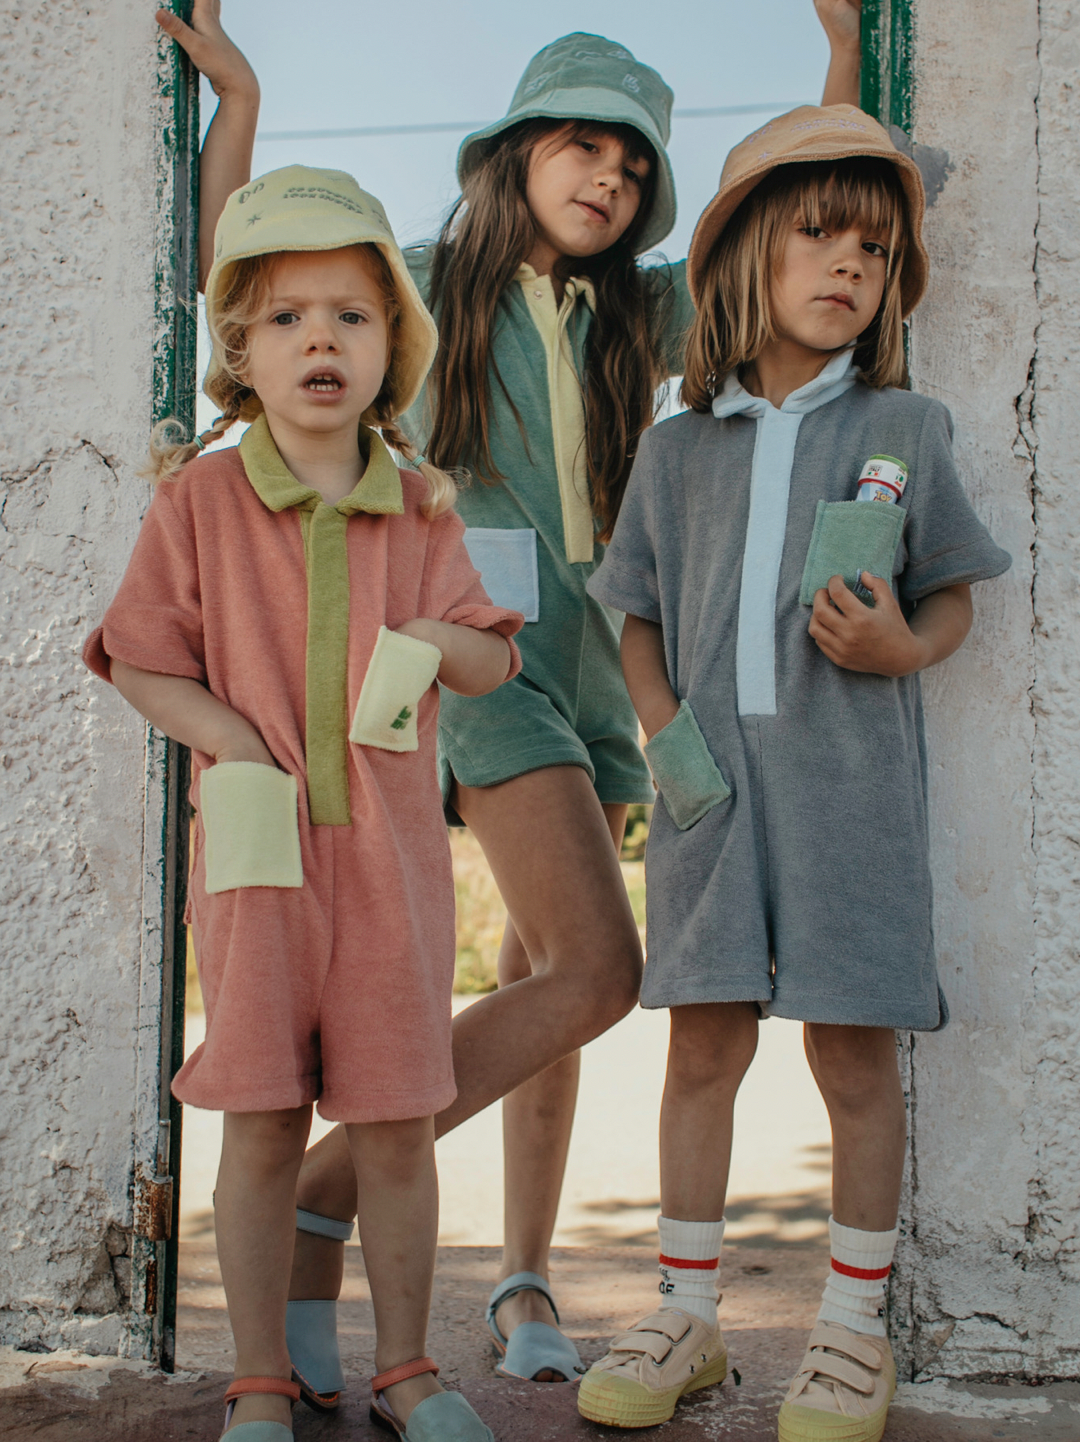 Three children wearing kids' jumpsuits in different colors: one peach with green collar and placket, one green with yellow collar and placket, one pale gray with blue collar and placket